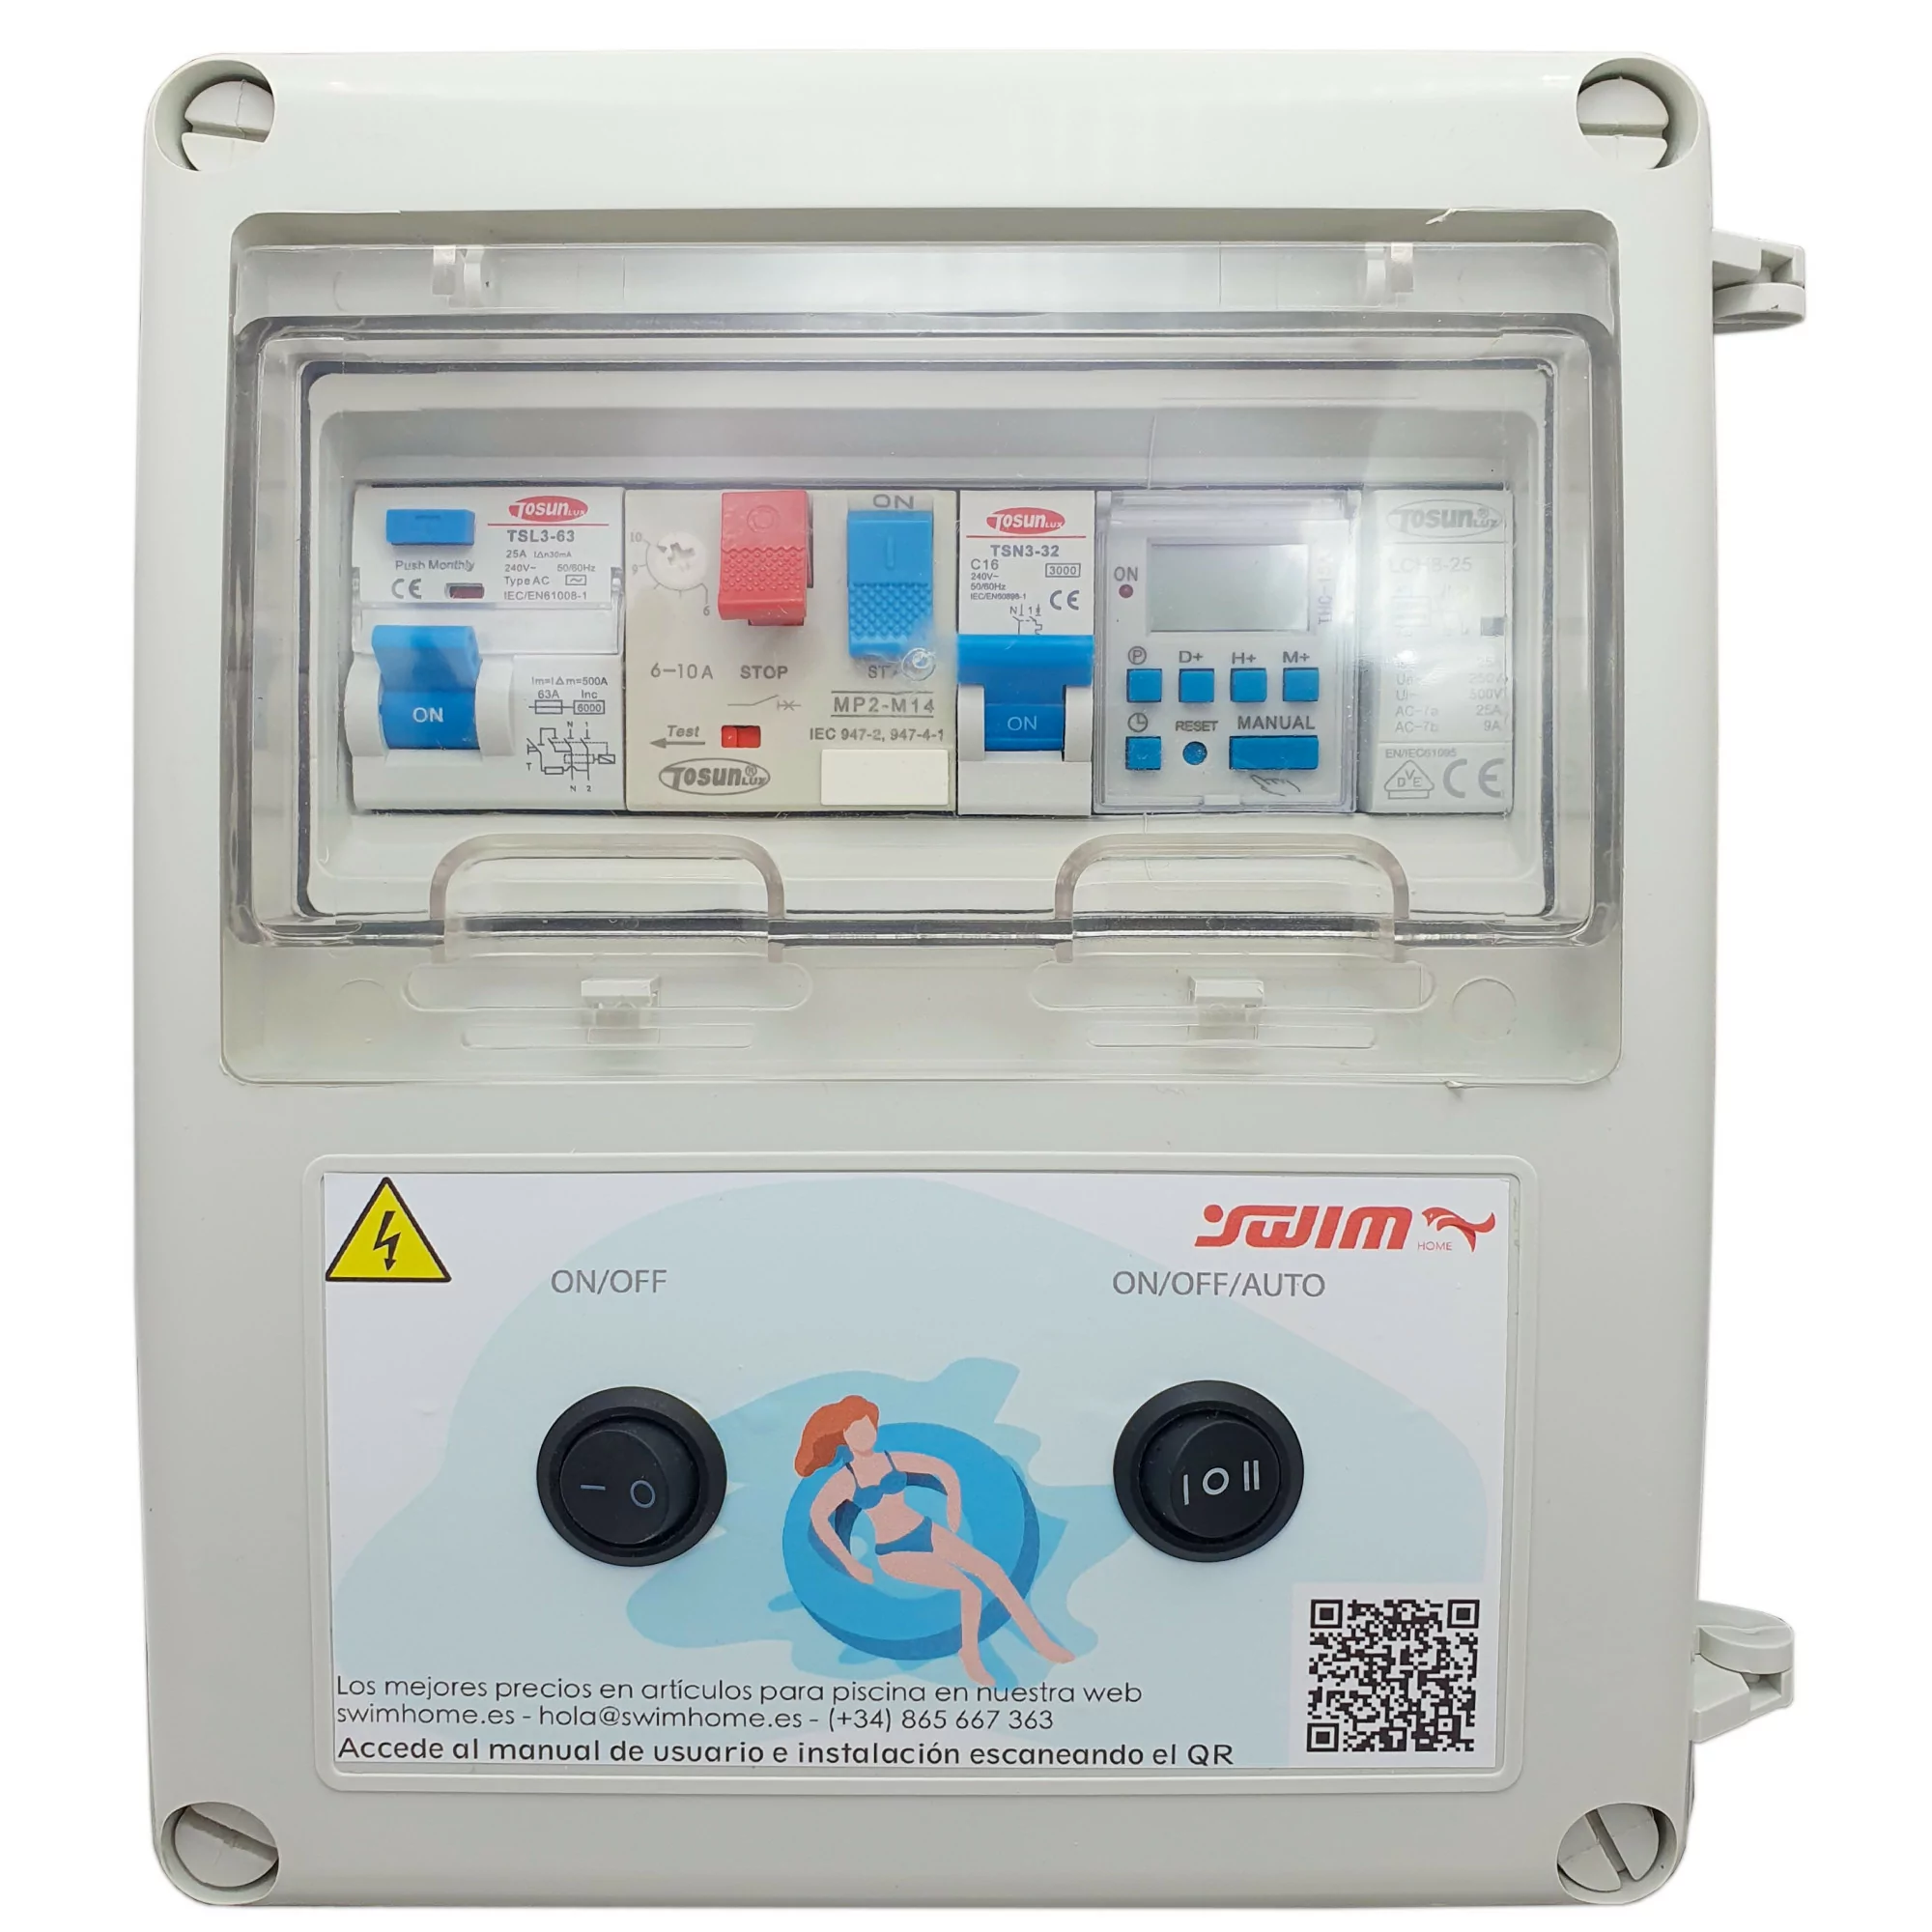 Electrical Panel for Swimming Pool Transformer 60W DC with Contactor for Motor